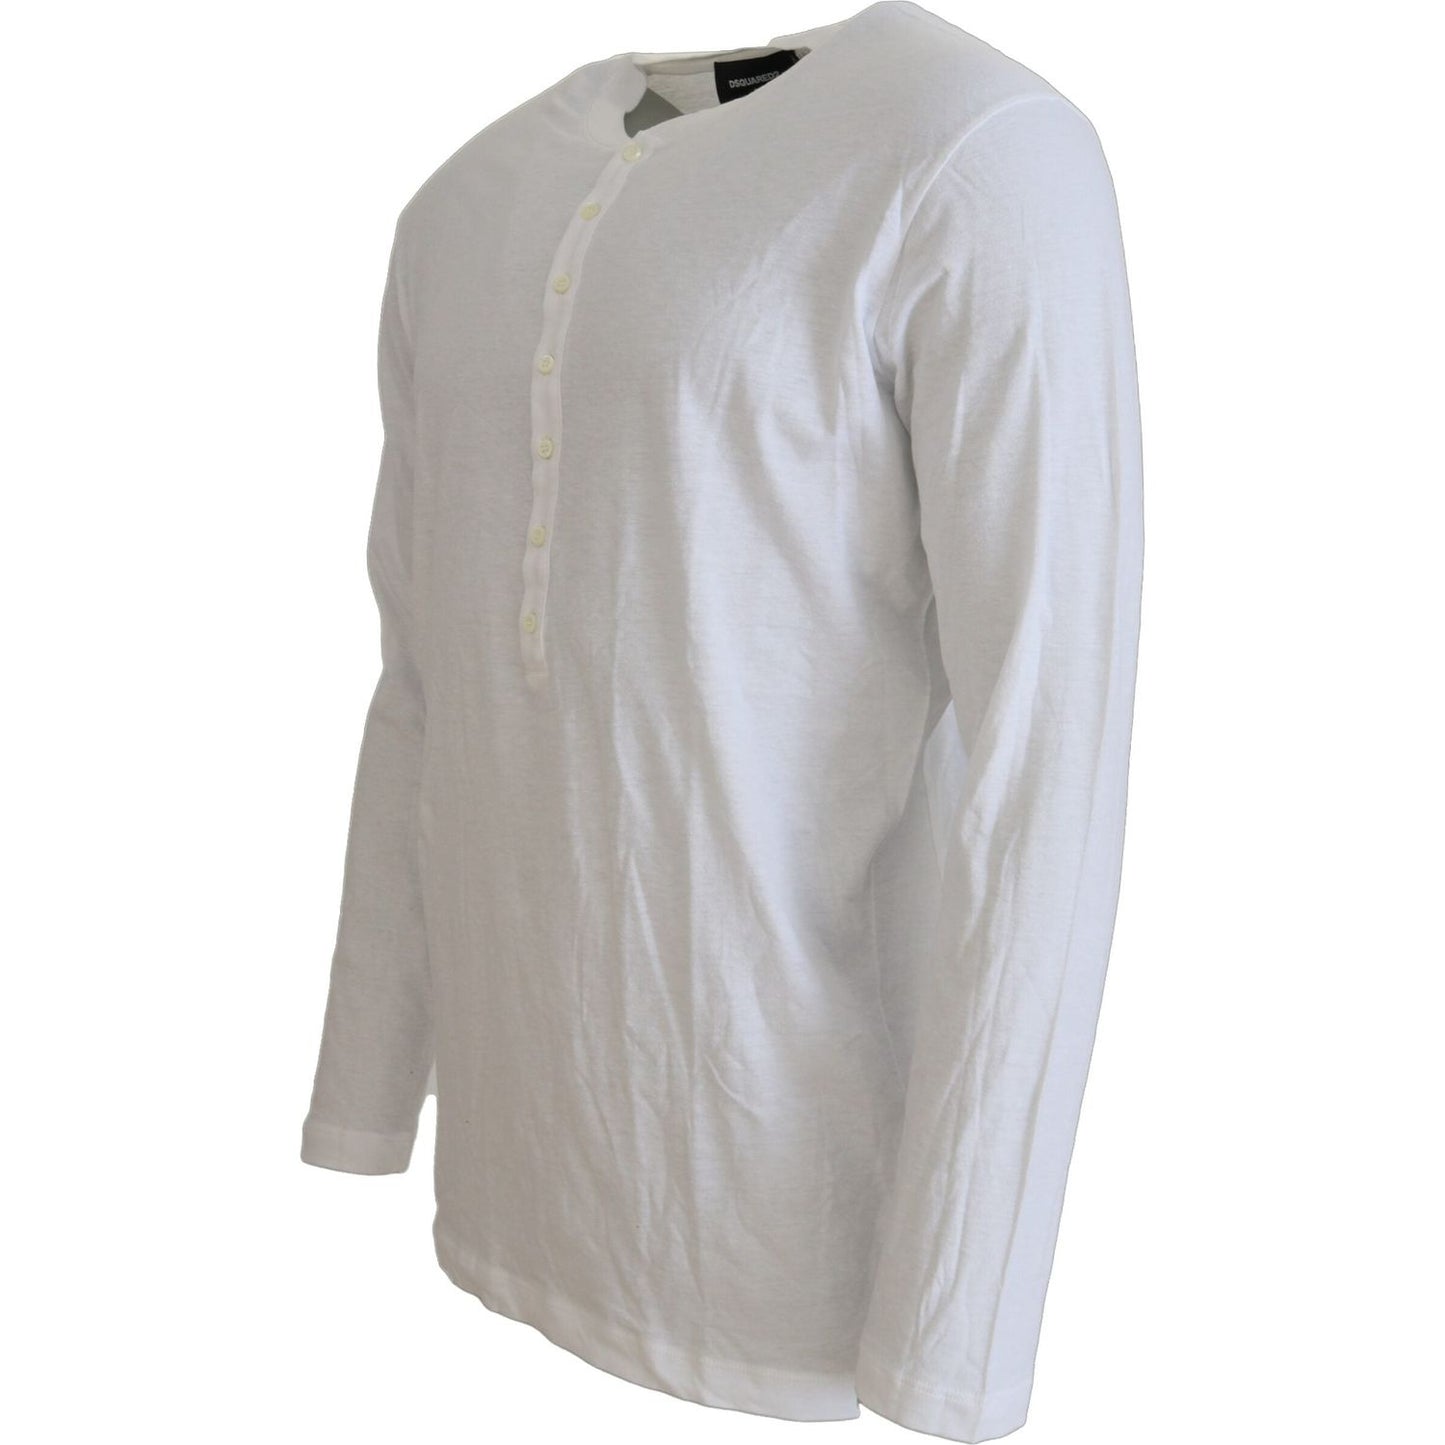 Dsquared² White Cotton Linen Long Sleeves Pullover Sweater white-cotton-linen-long-sleeves-pullover-sweater